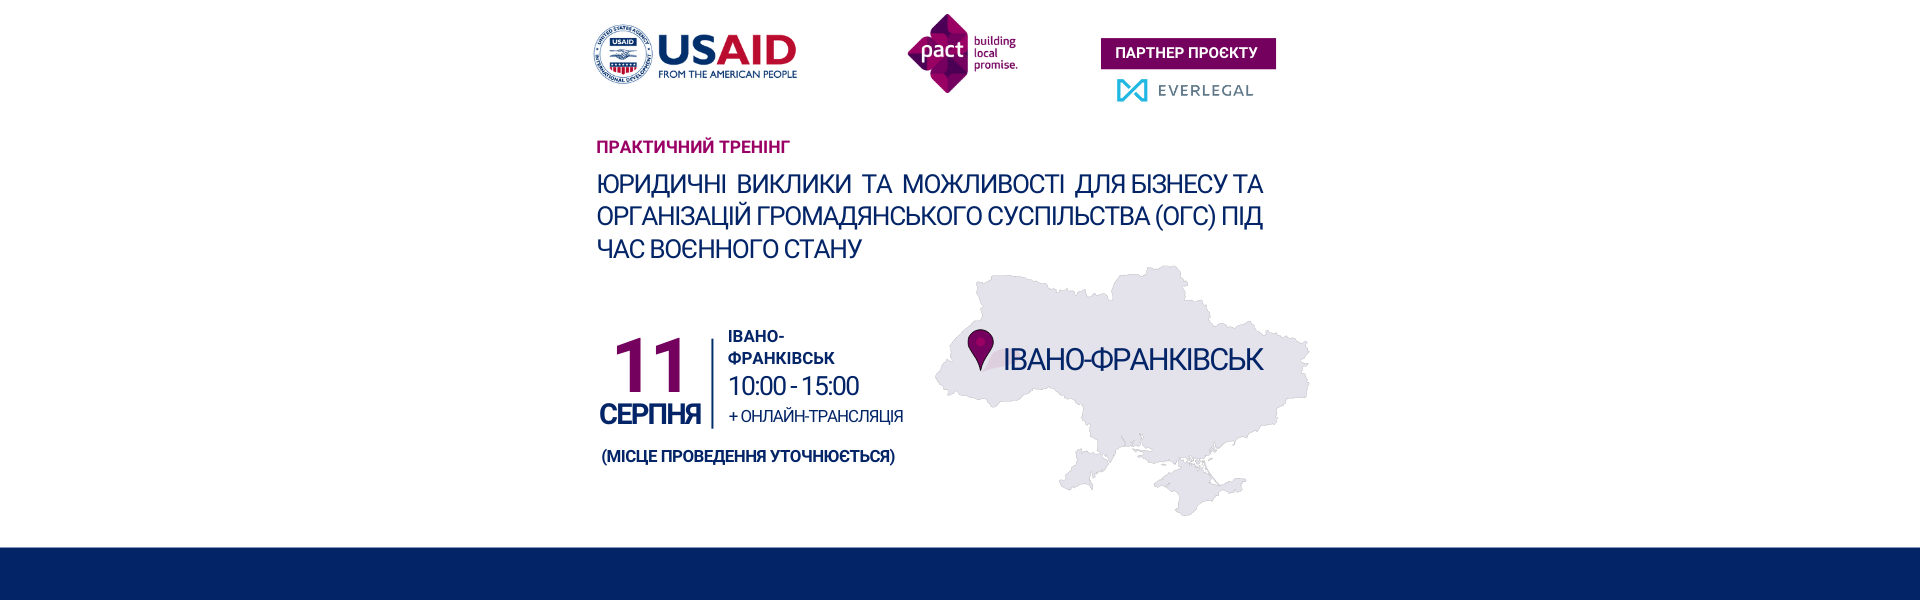 Practical training for business and civil society organisations in Ivano-Frankivsk